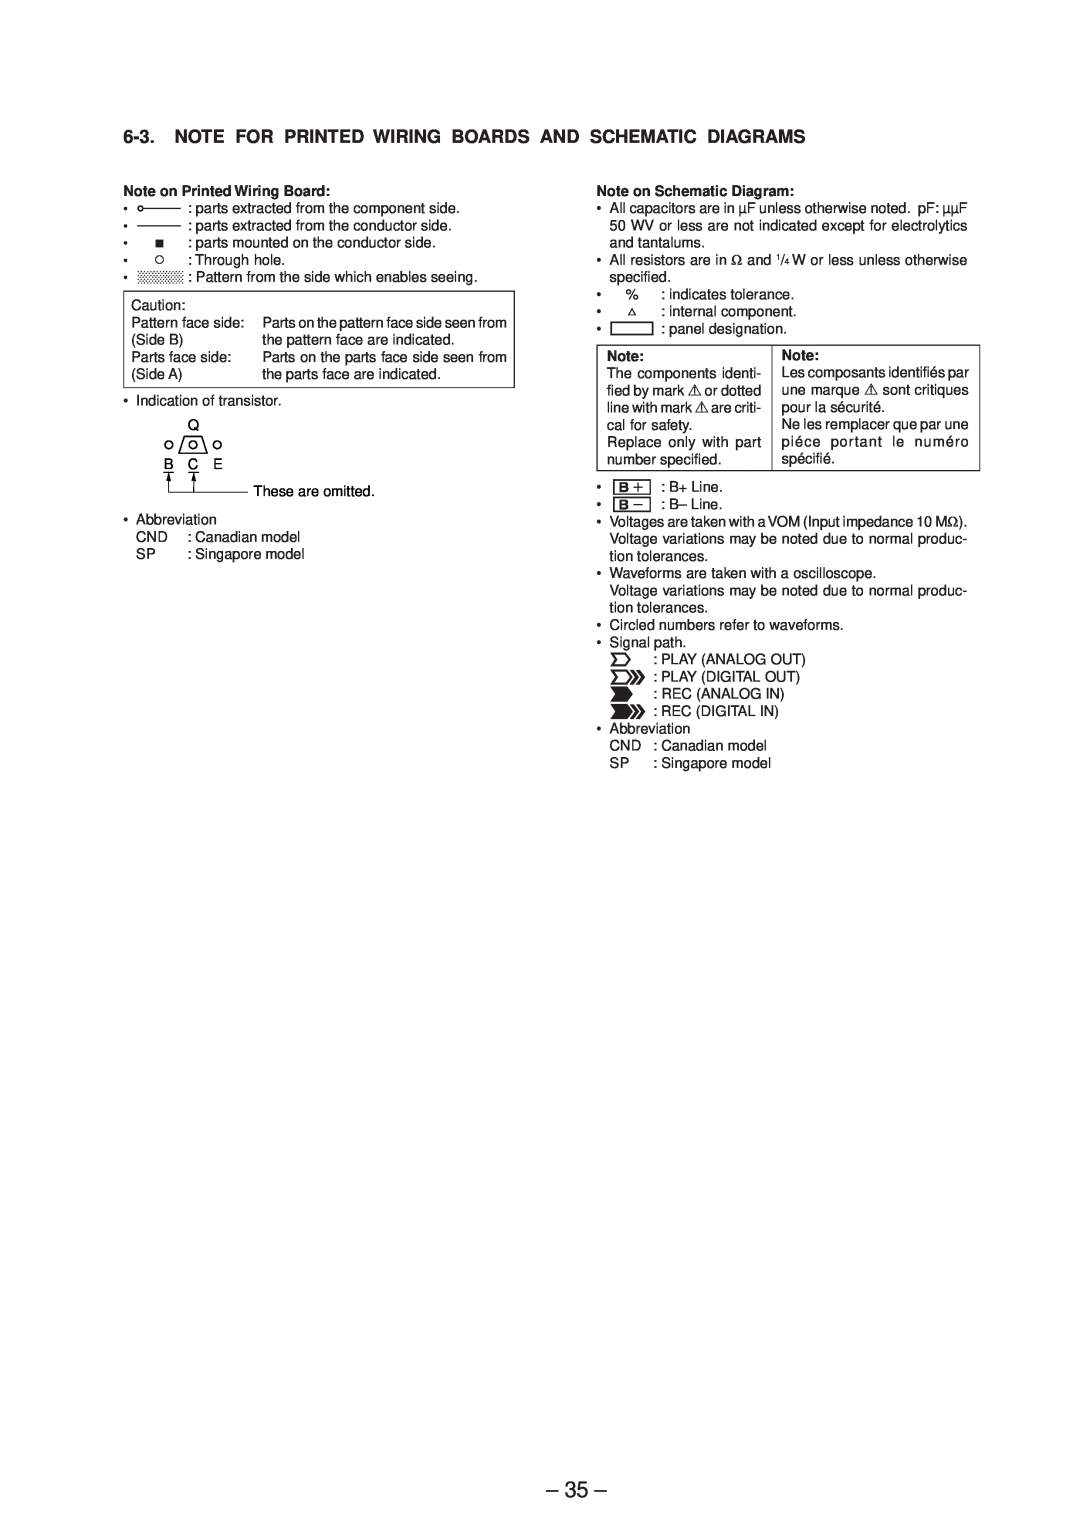 Sony MDS-JE530 service manual 35, Note on Printed Wiring Board, Note on Schematic Diagram 